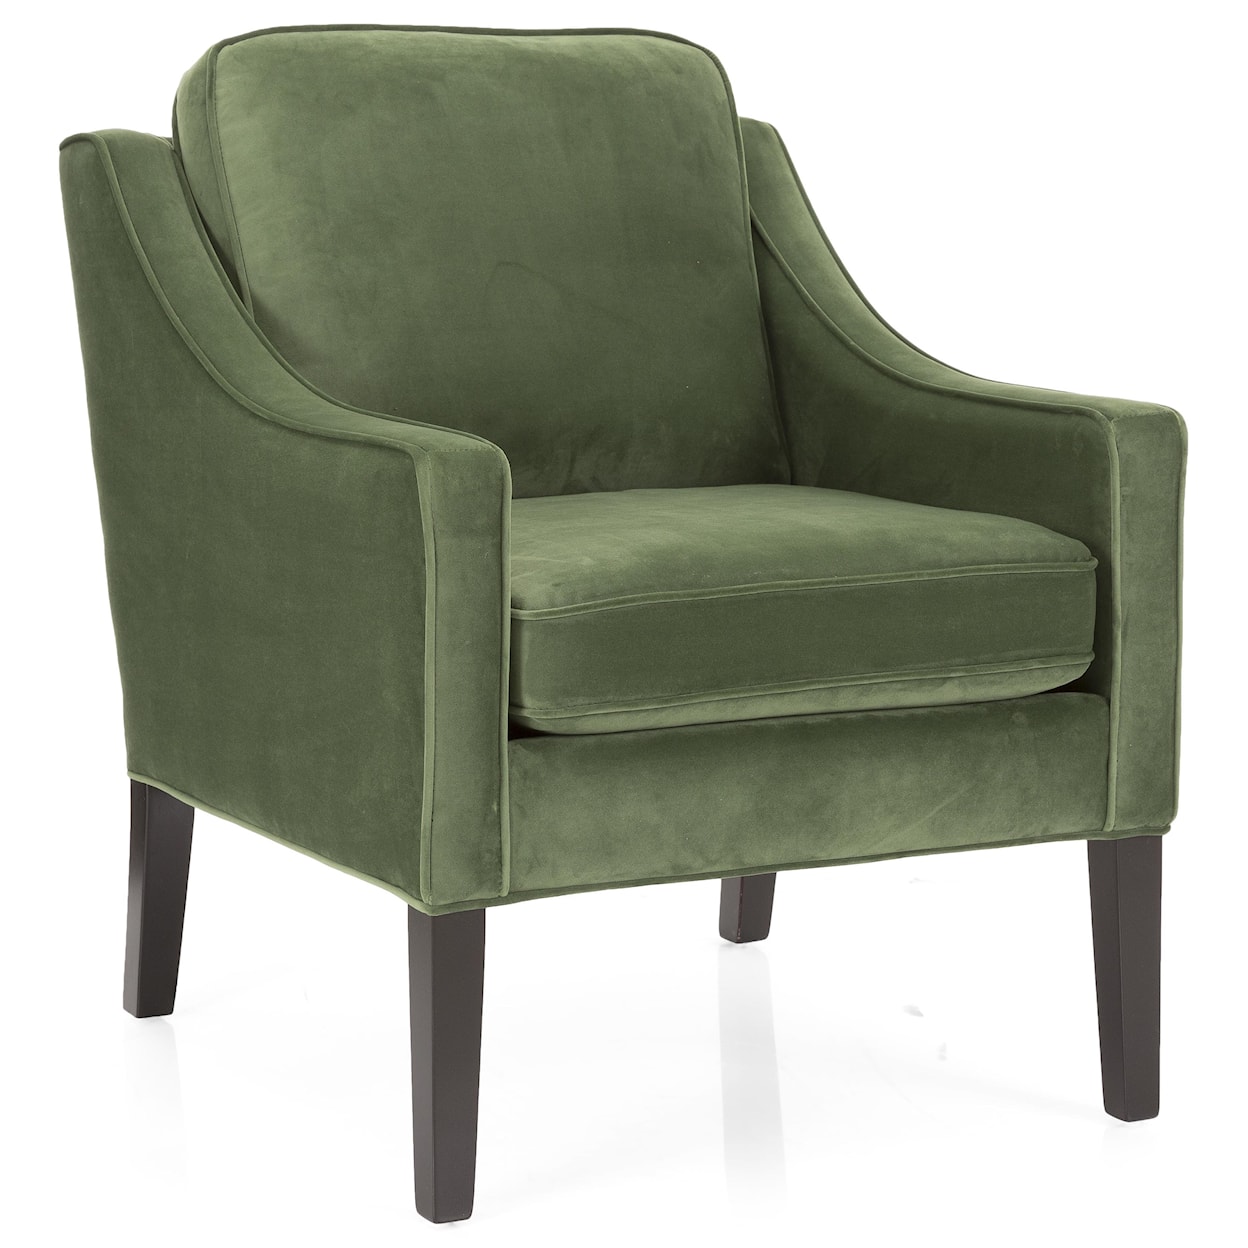 Taelor Designs Jane Occasional Chair